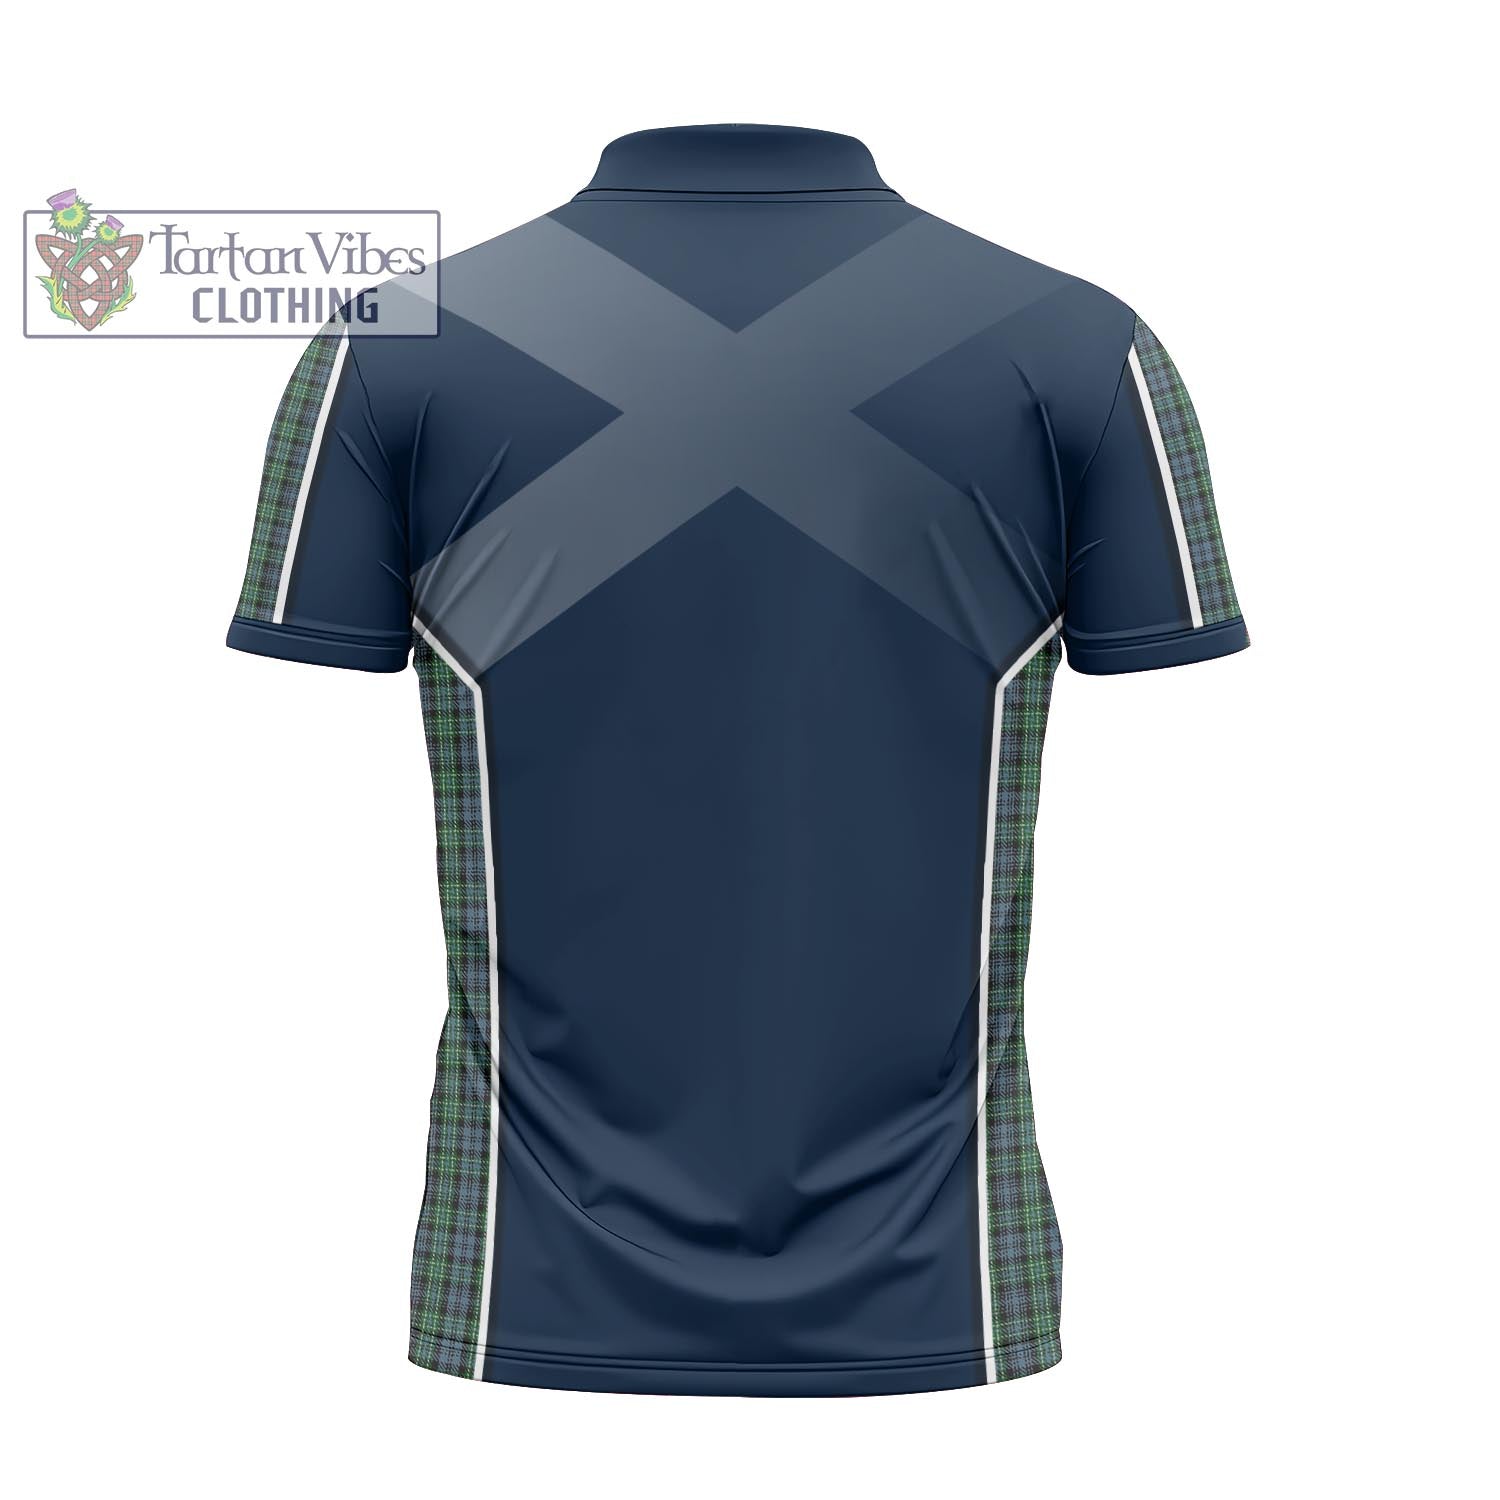 Tartan Vibes Clothing Arbuthnot Tartan Zipper Polo Shirt with Family Crest and Scottish Thistle Vibes Sport Style